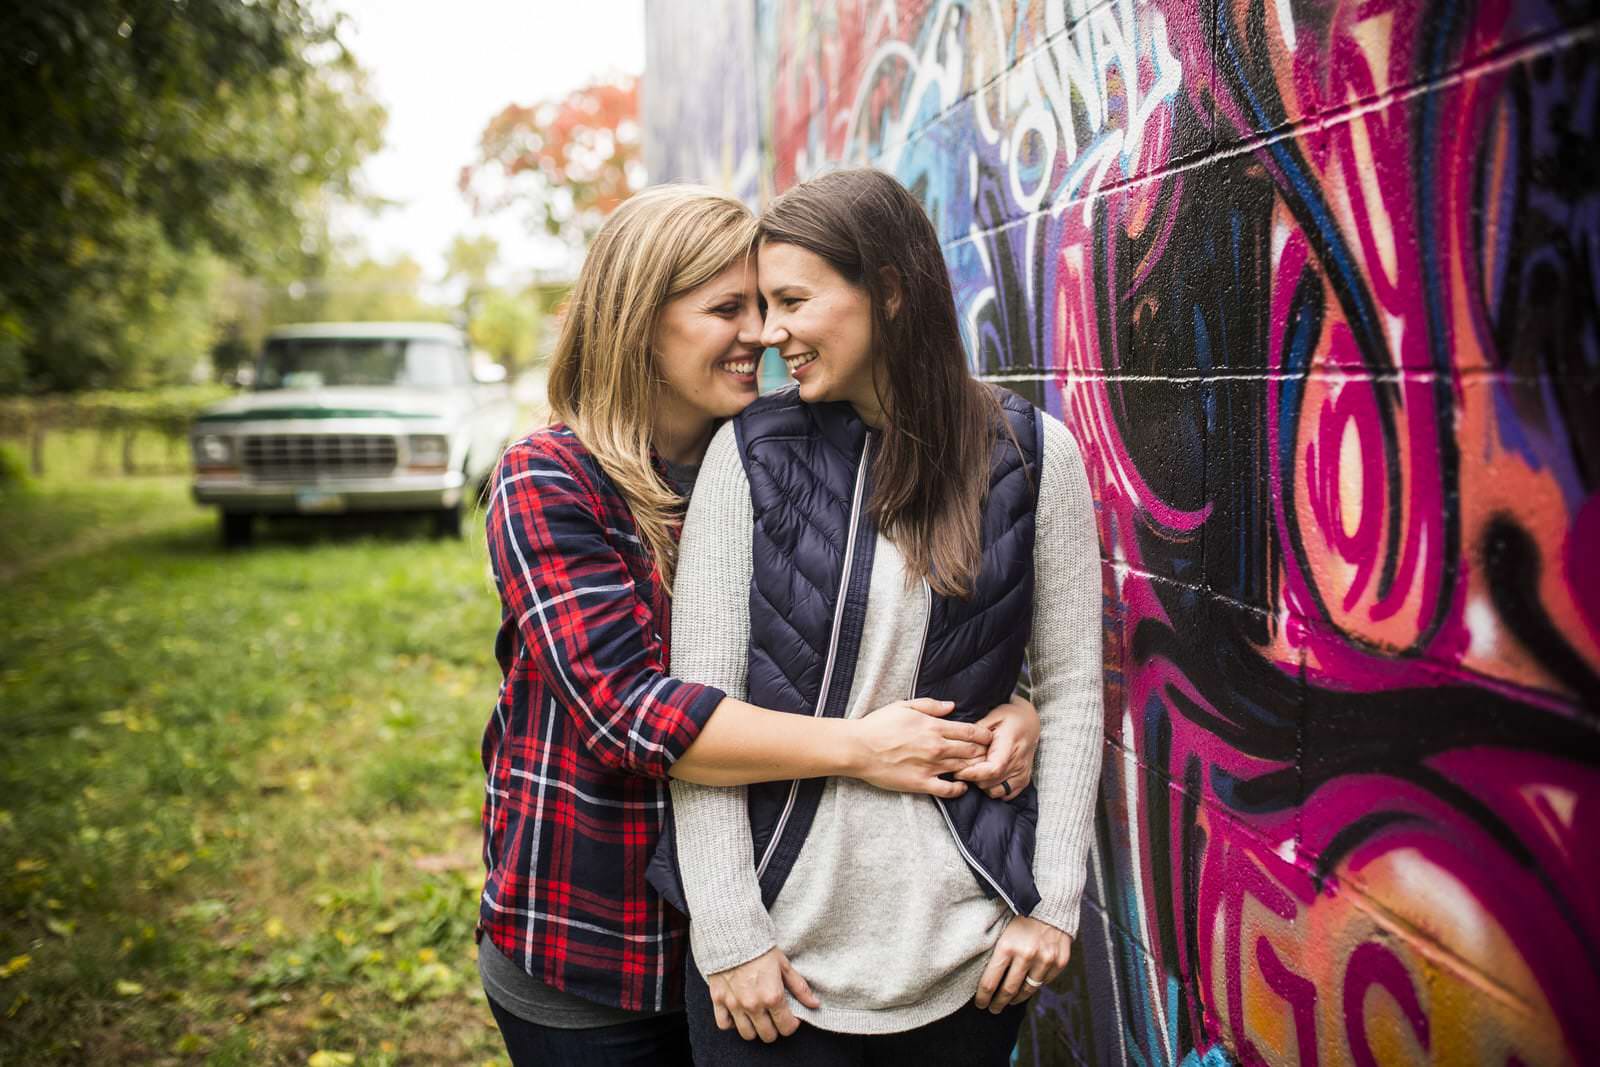 Jenna-Ashley-Strongwater-400-West-Rich-Scioto-Mile-engagement-session-by-Amy-Ann-00008